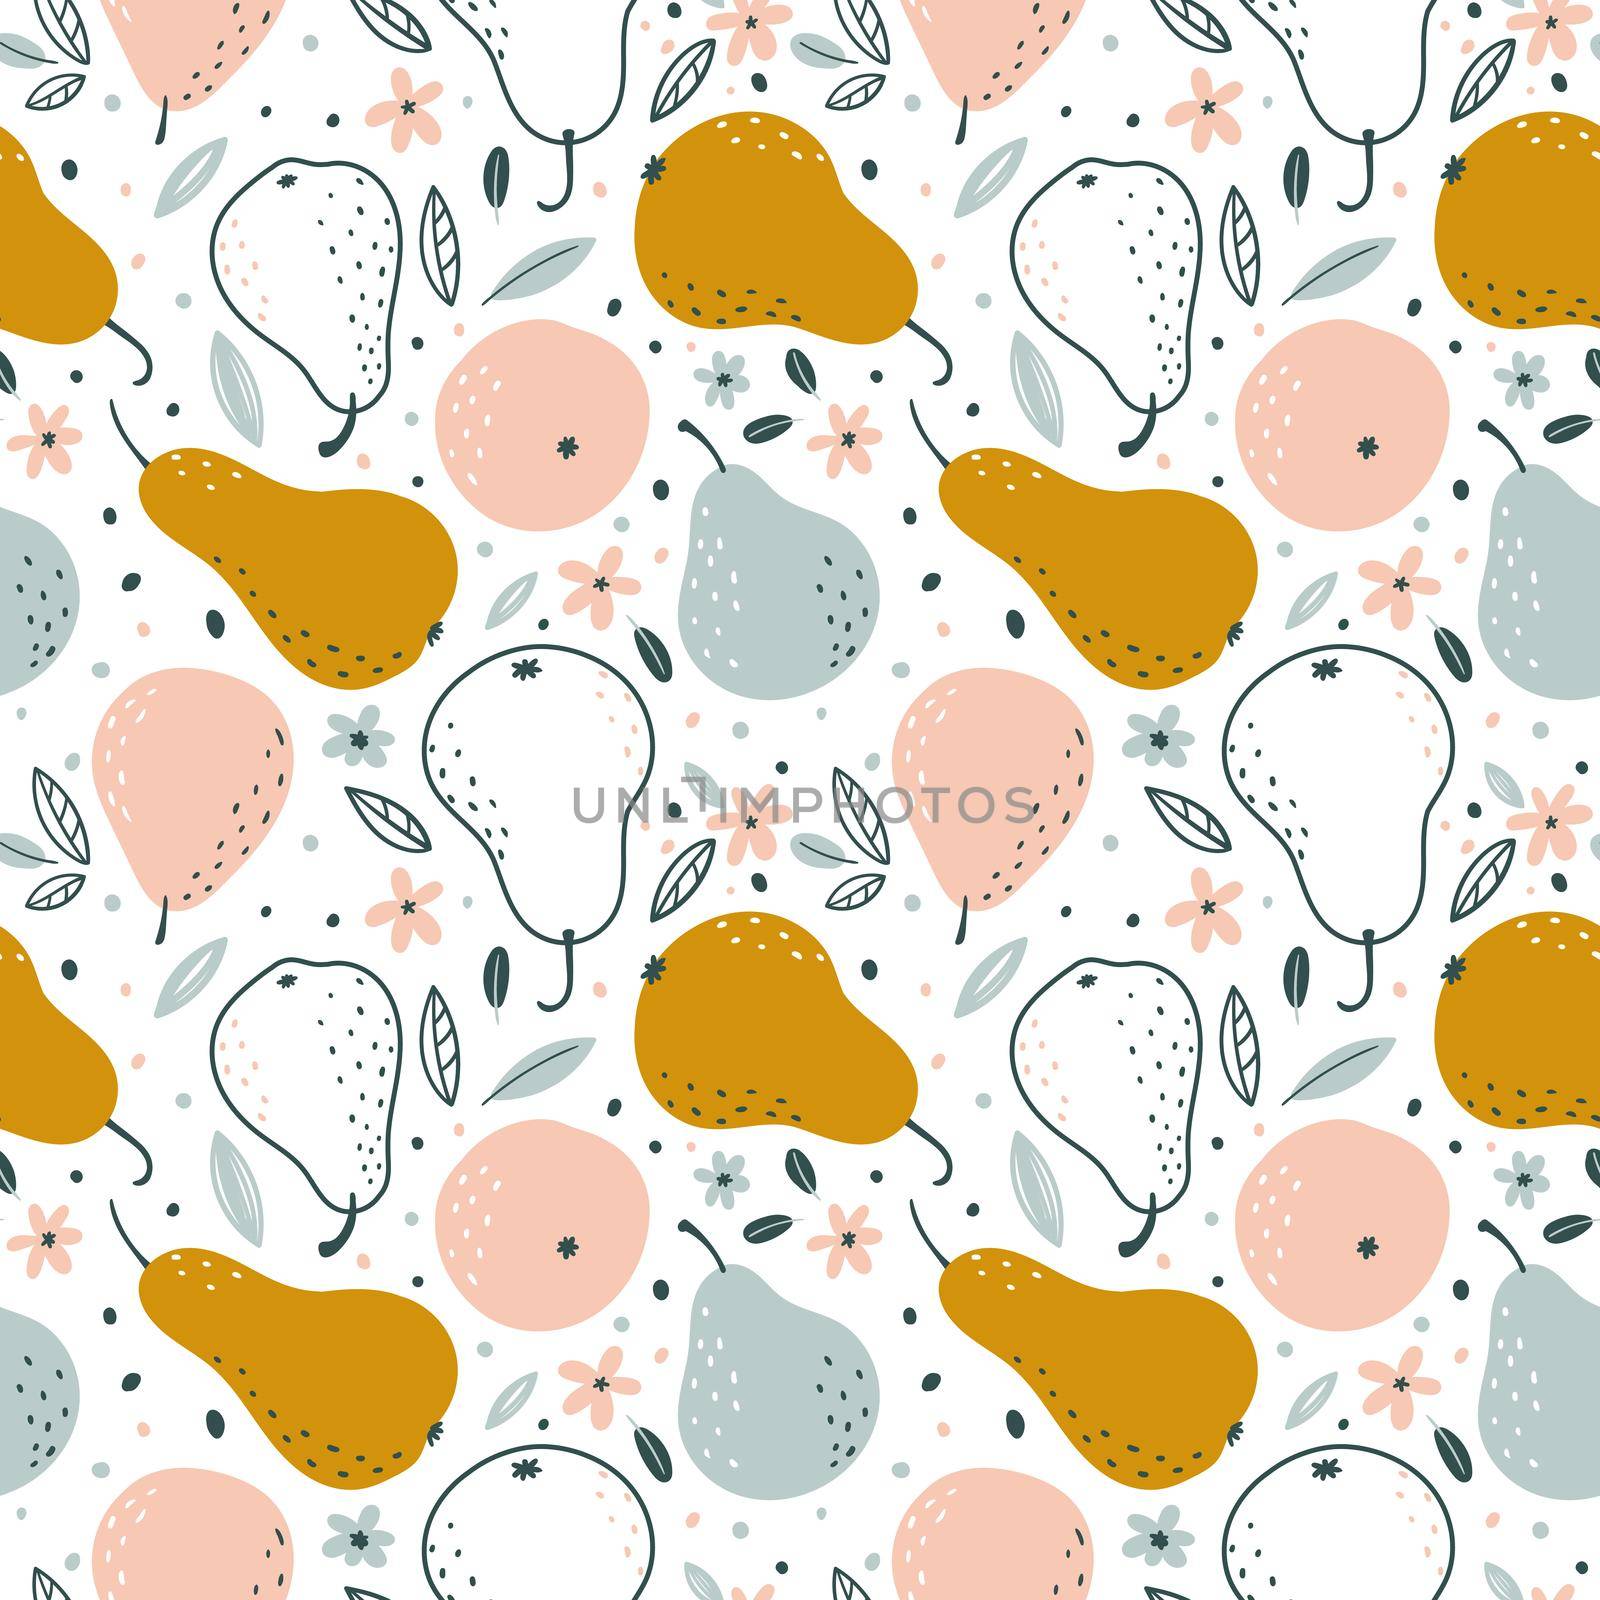 Seamless pattern with pears in Scandinavian style on a white background. by Lena_Khmelniuk